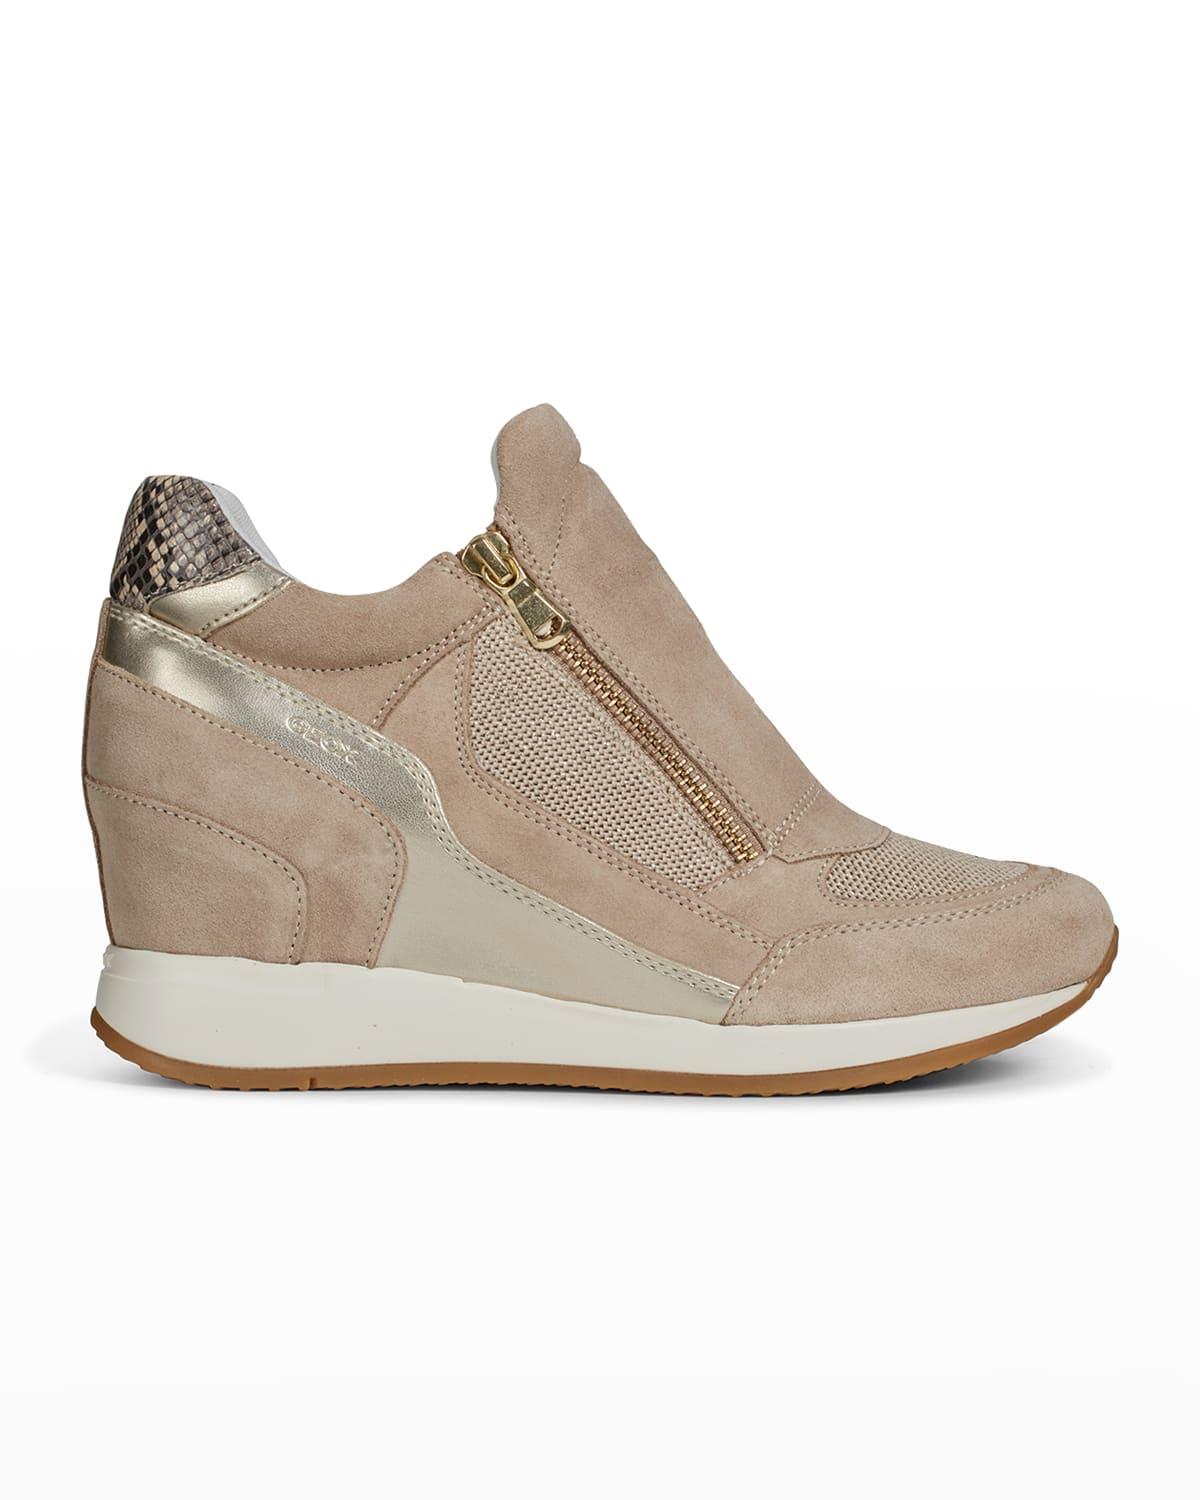 Geox Nydame Mix-media Wedge Sneakers in Natural |